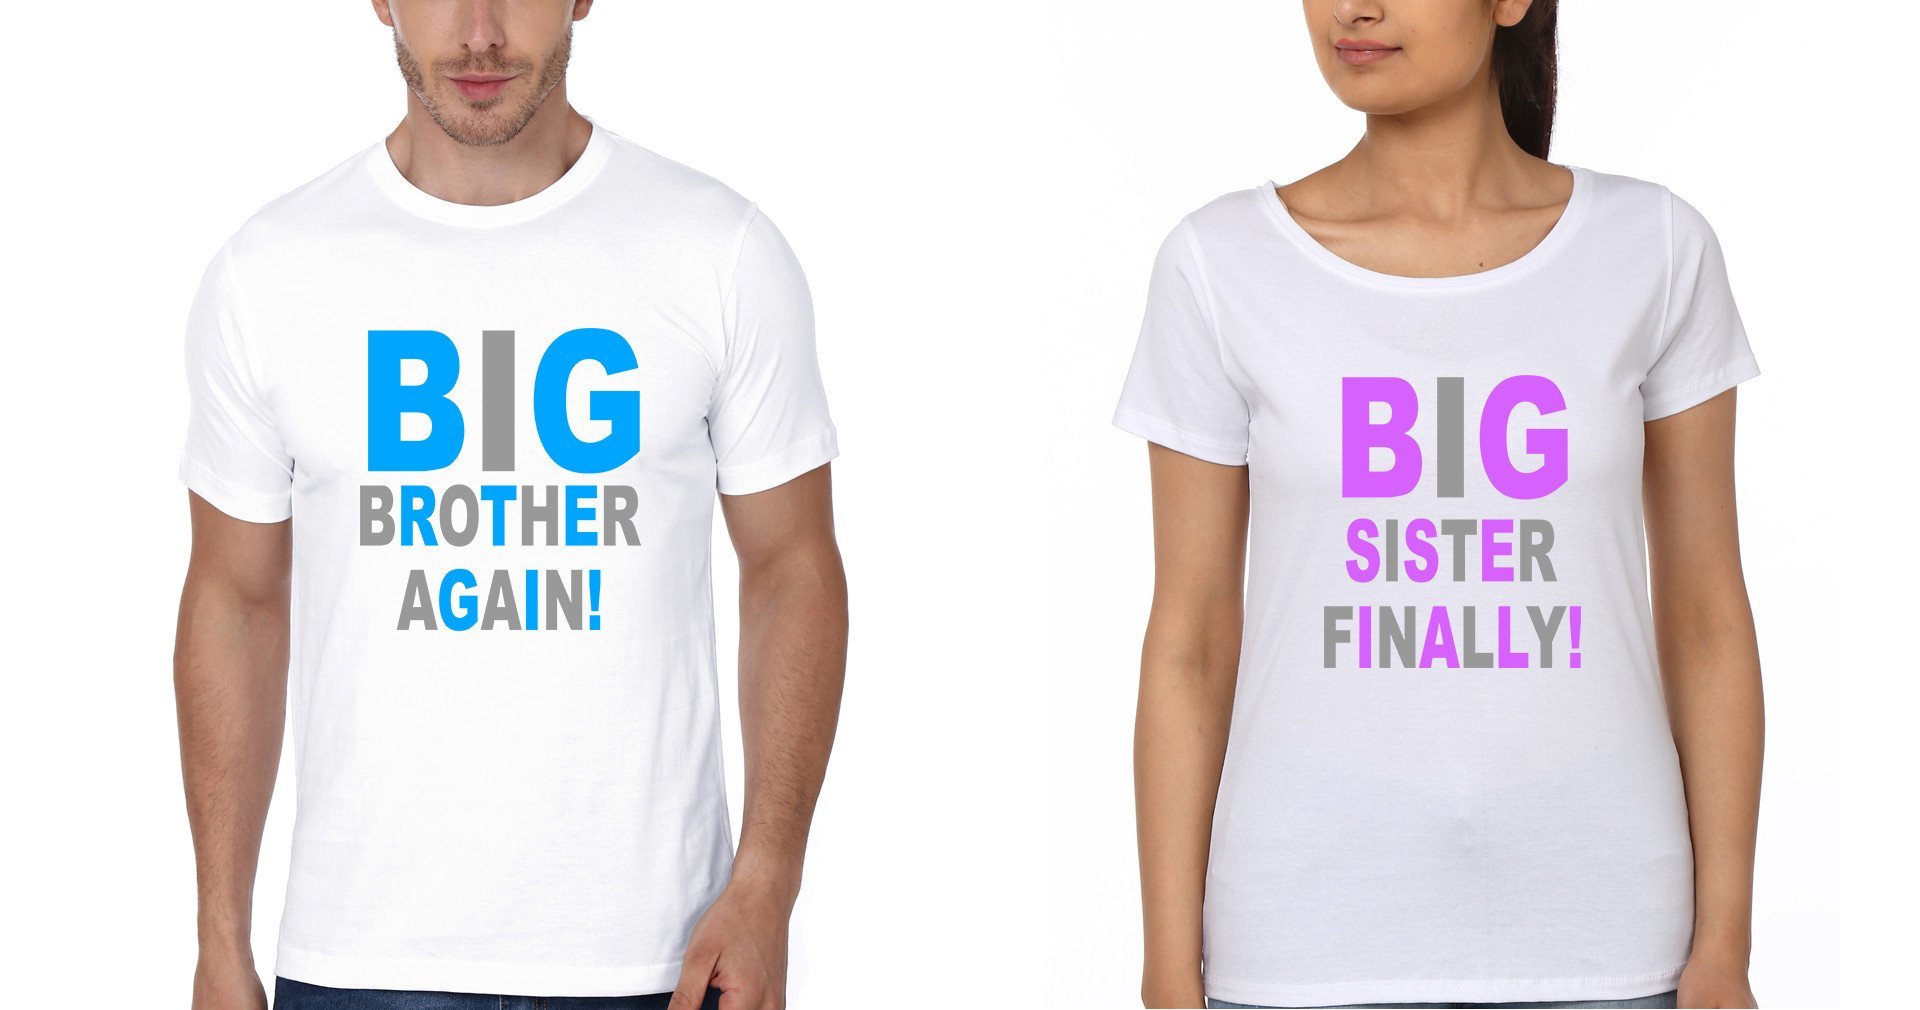 FunkyTradition Big Brother Again Big Sister Finally Brother Sister White Half Sleeves T Shirt - FunkyTradition